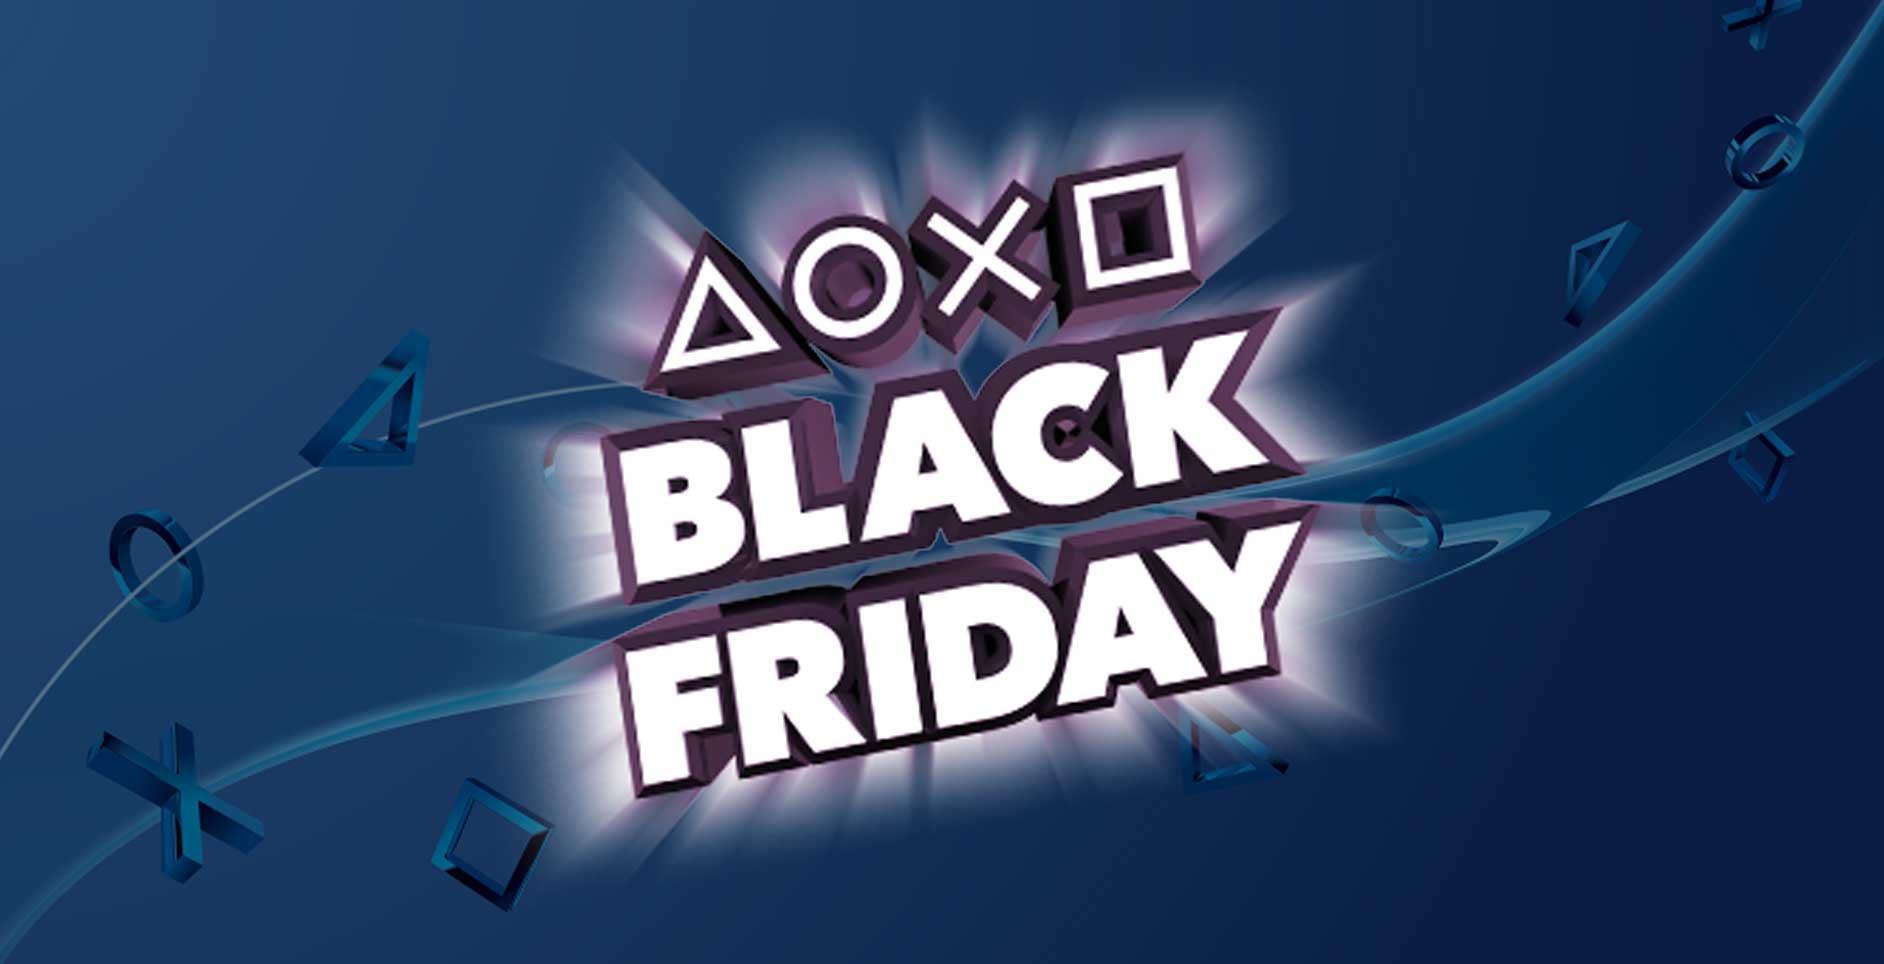 black friday 2018 ps4 store